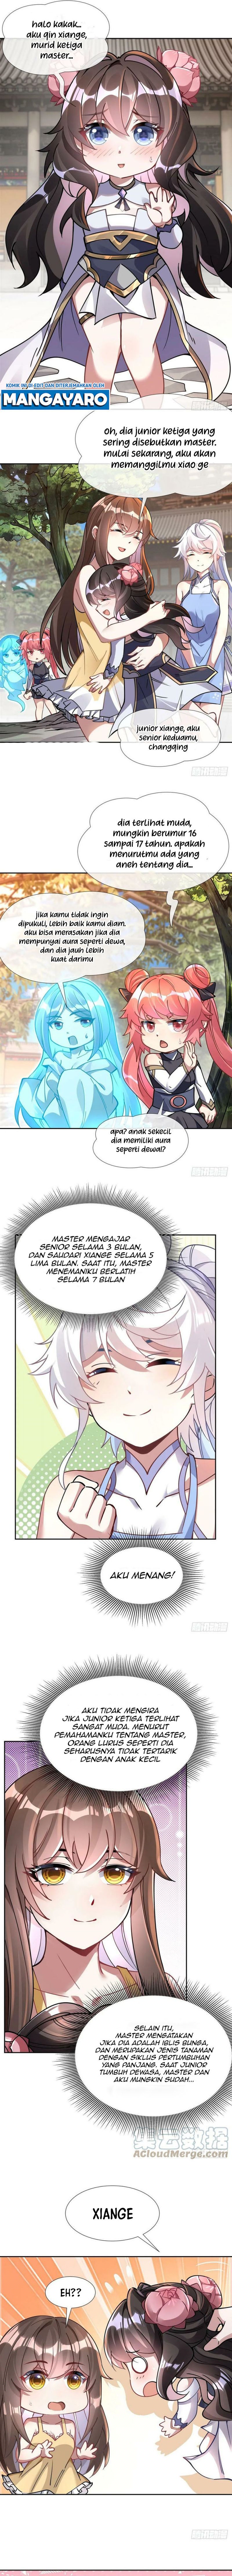 Dilarang COPAS - situs resmi www.mangacanblog.com - Komik my female apprentices are all big shots from the future 160 - chapter 160 161 Indonesia my female apprentices are all big shots from the future 160 - chapter 160 Terbaru 6|Baca Manga Komik Indonesia|Mangacan